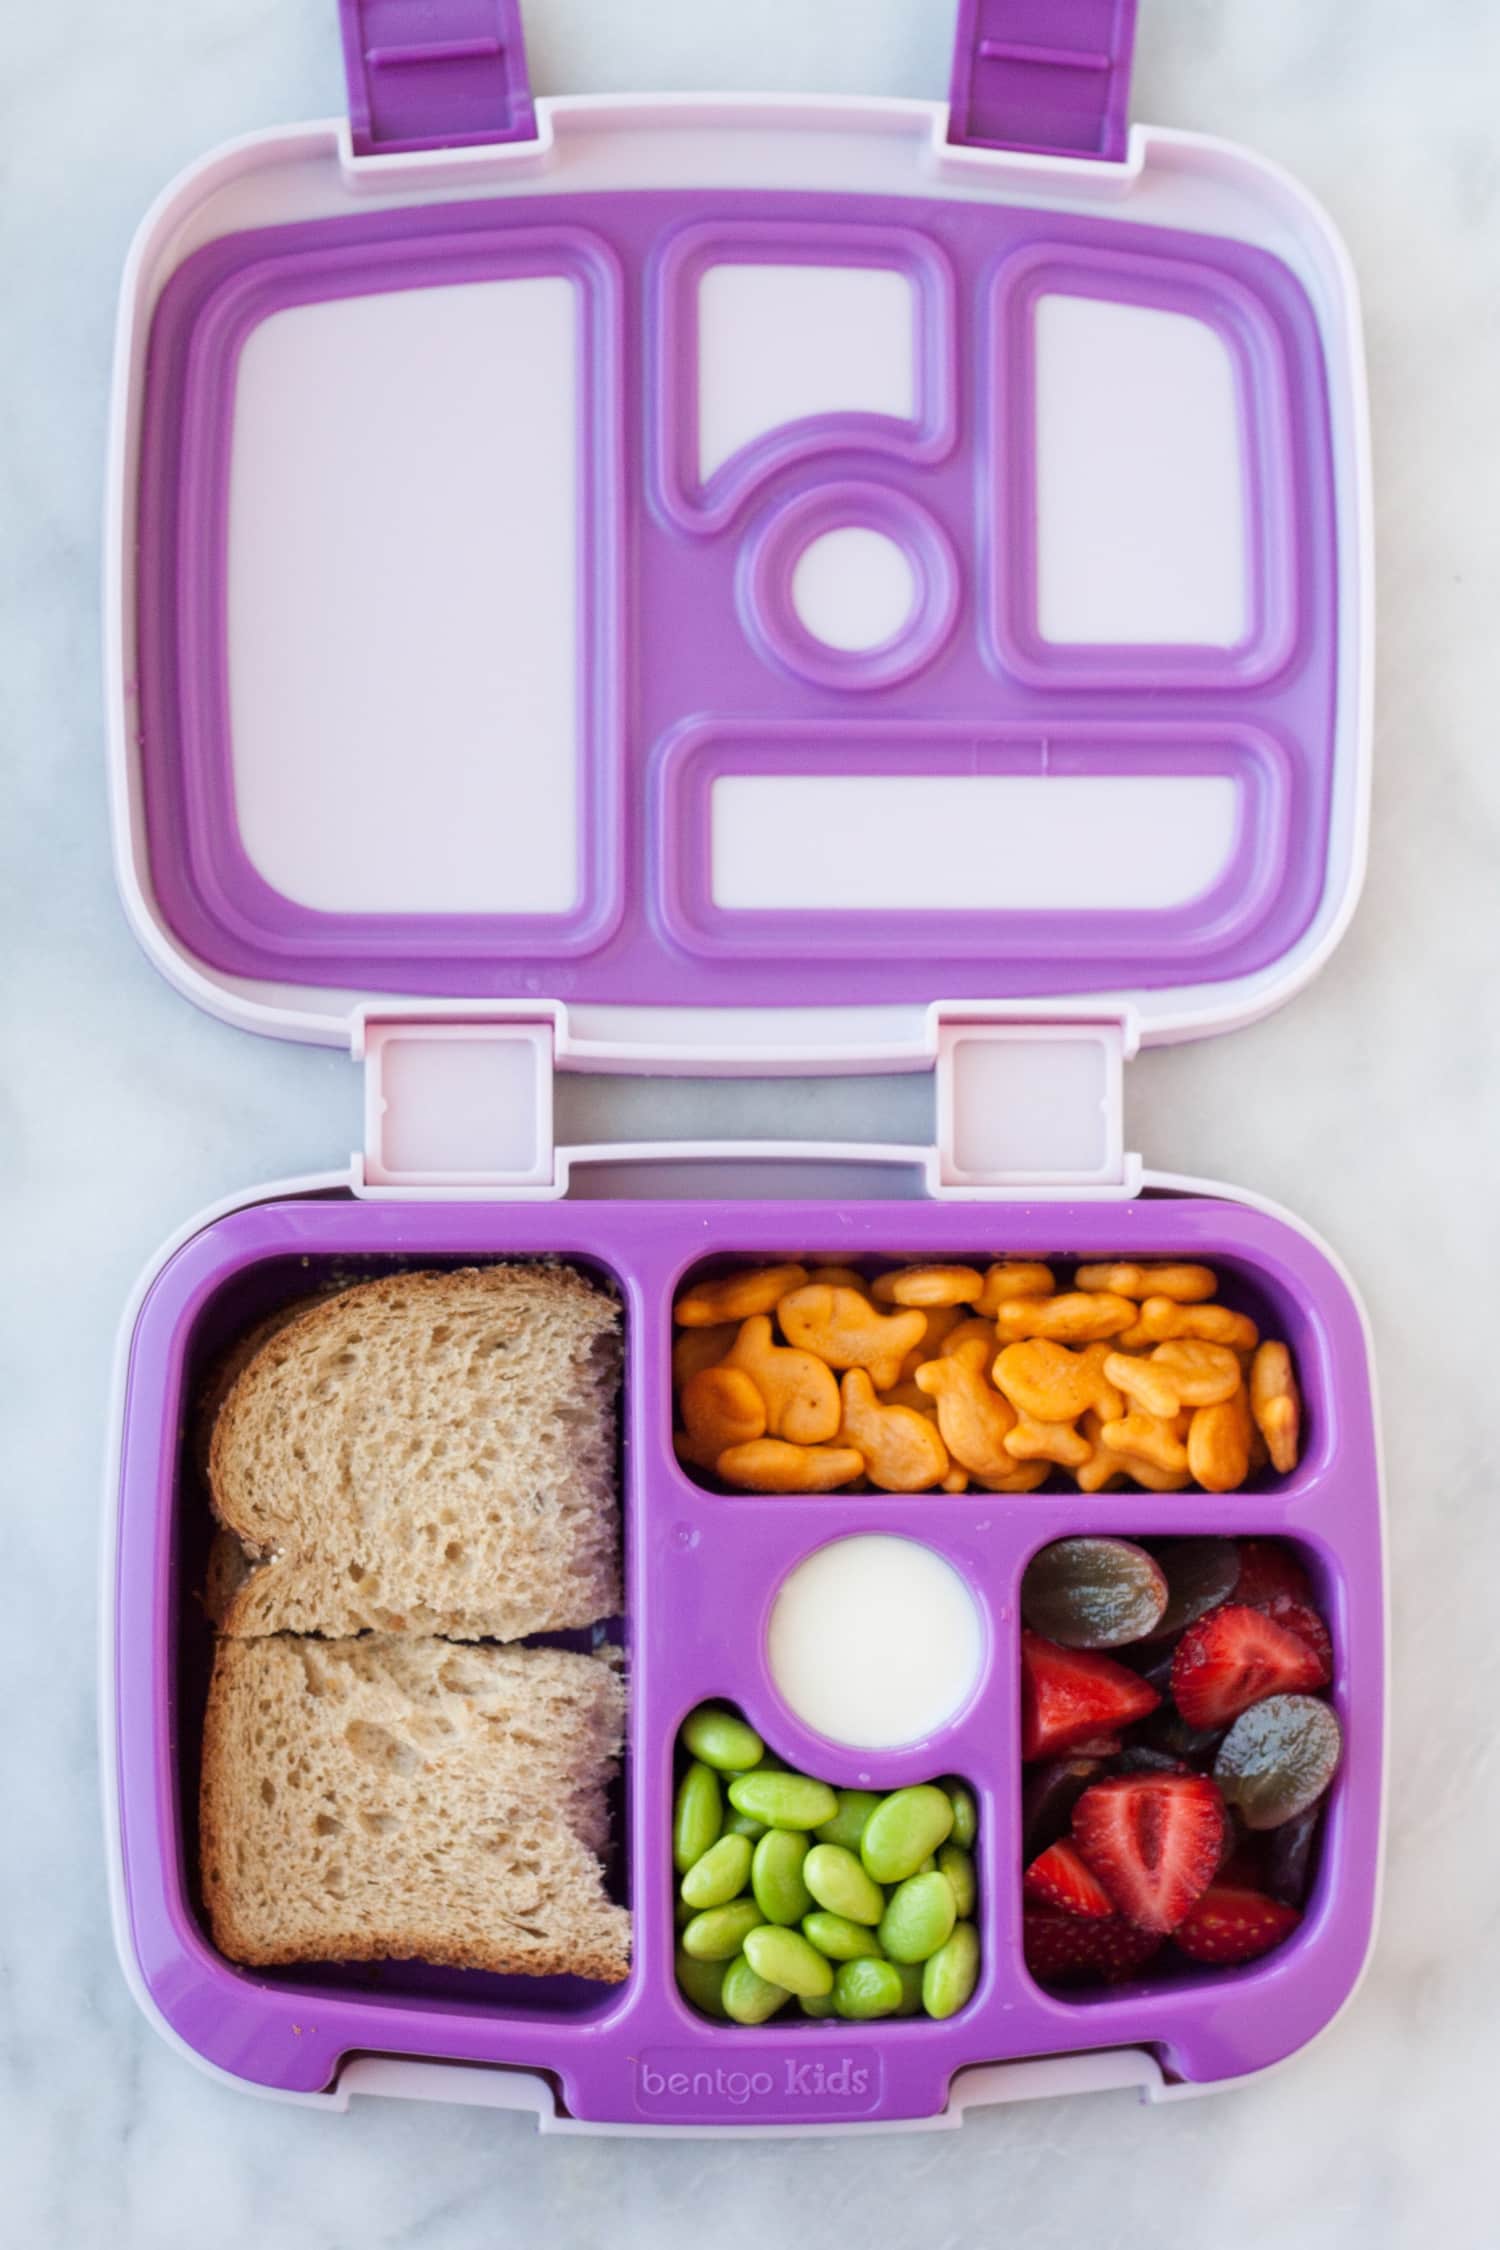 the-bentgo-kids-lunch-box-makes-a-varied-lunch-easy-leakproof-kitchn